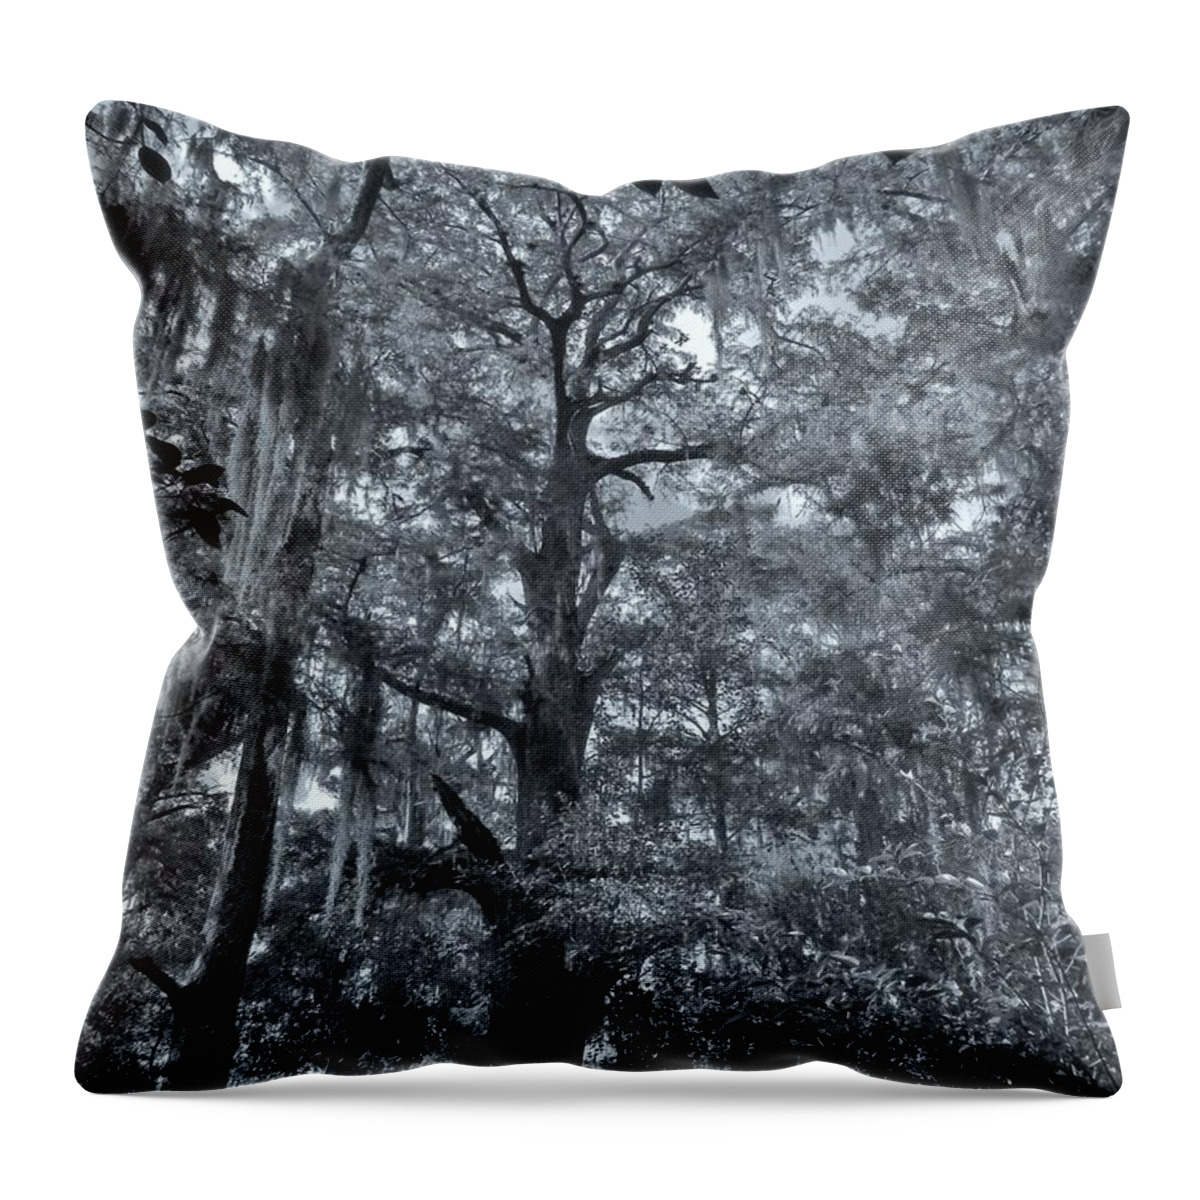 Cypress Tree Throw Pillow featuring the photograph Inside A Cypress Dome by Christopher Perez